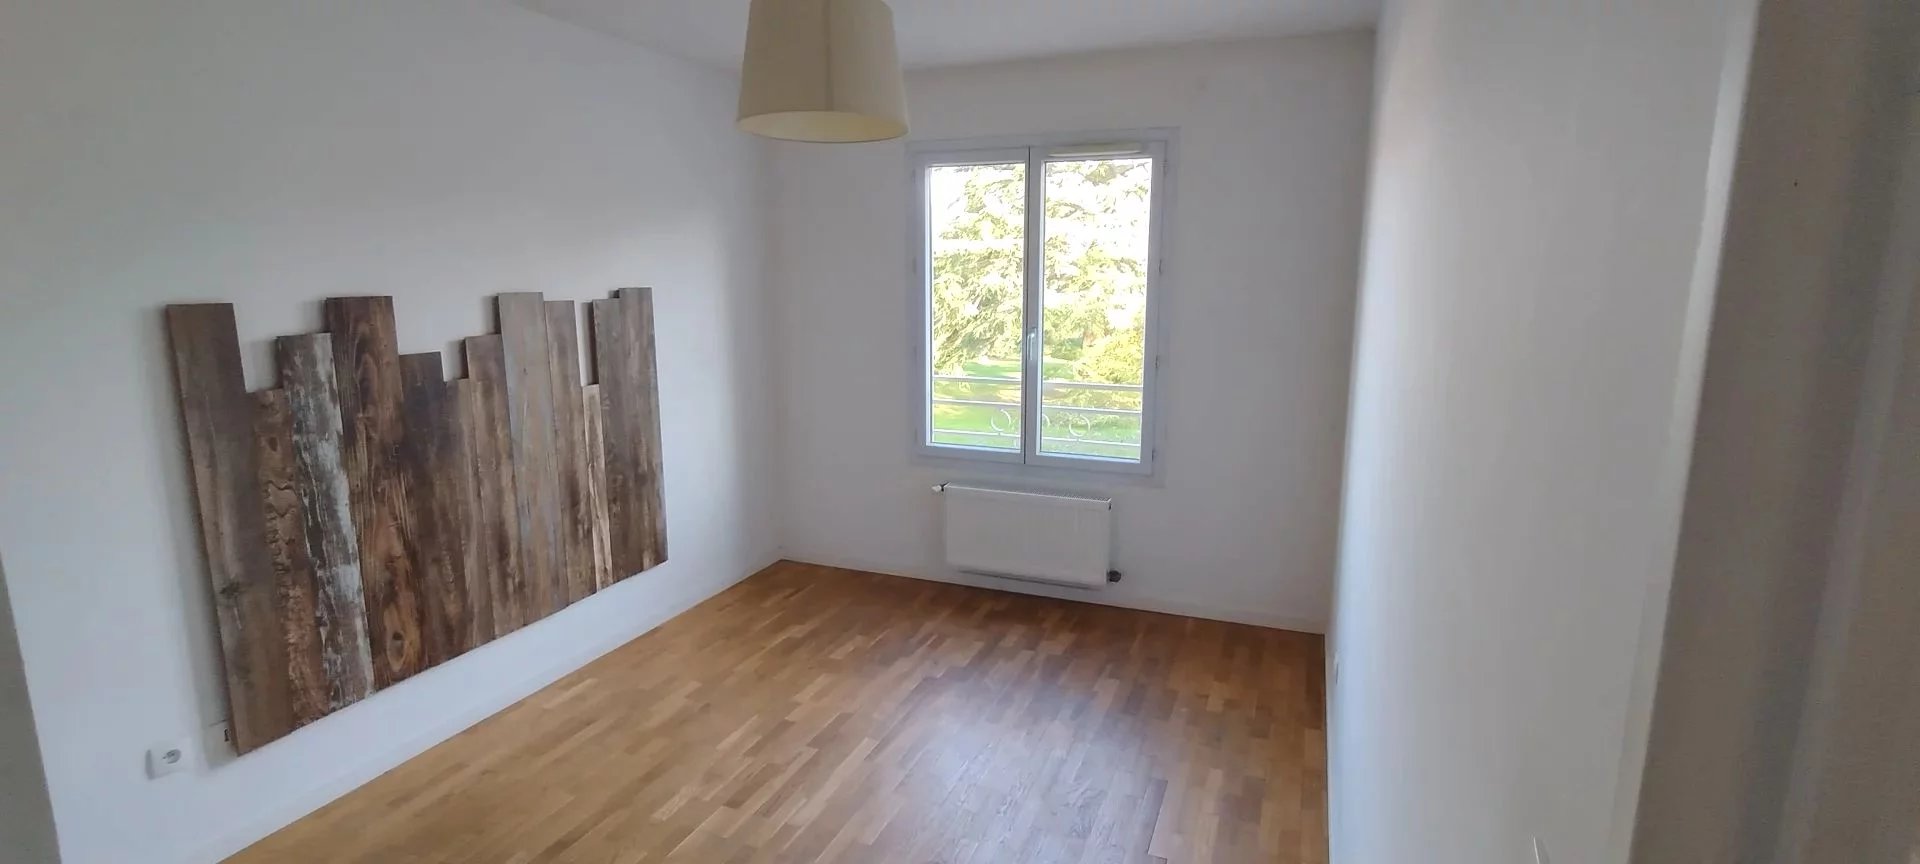 VENTE APPARTEMENT – F3 – CHASSELAY